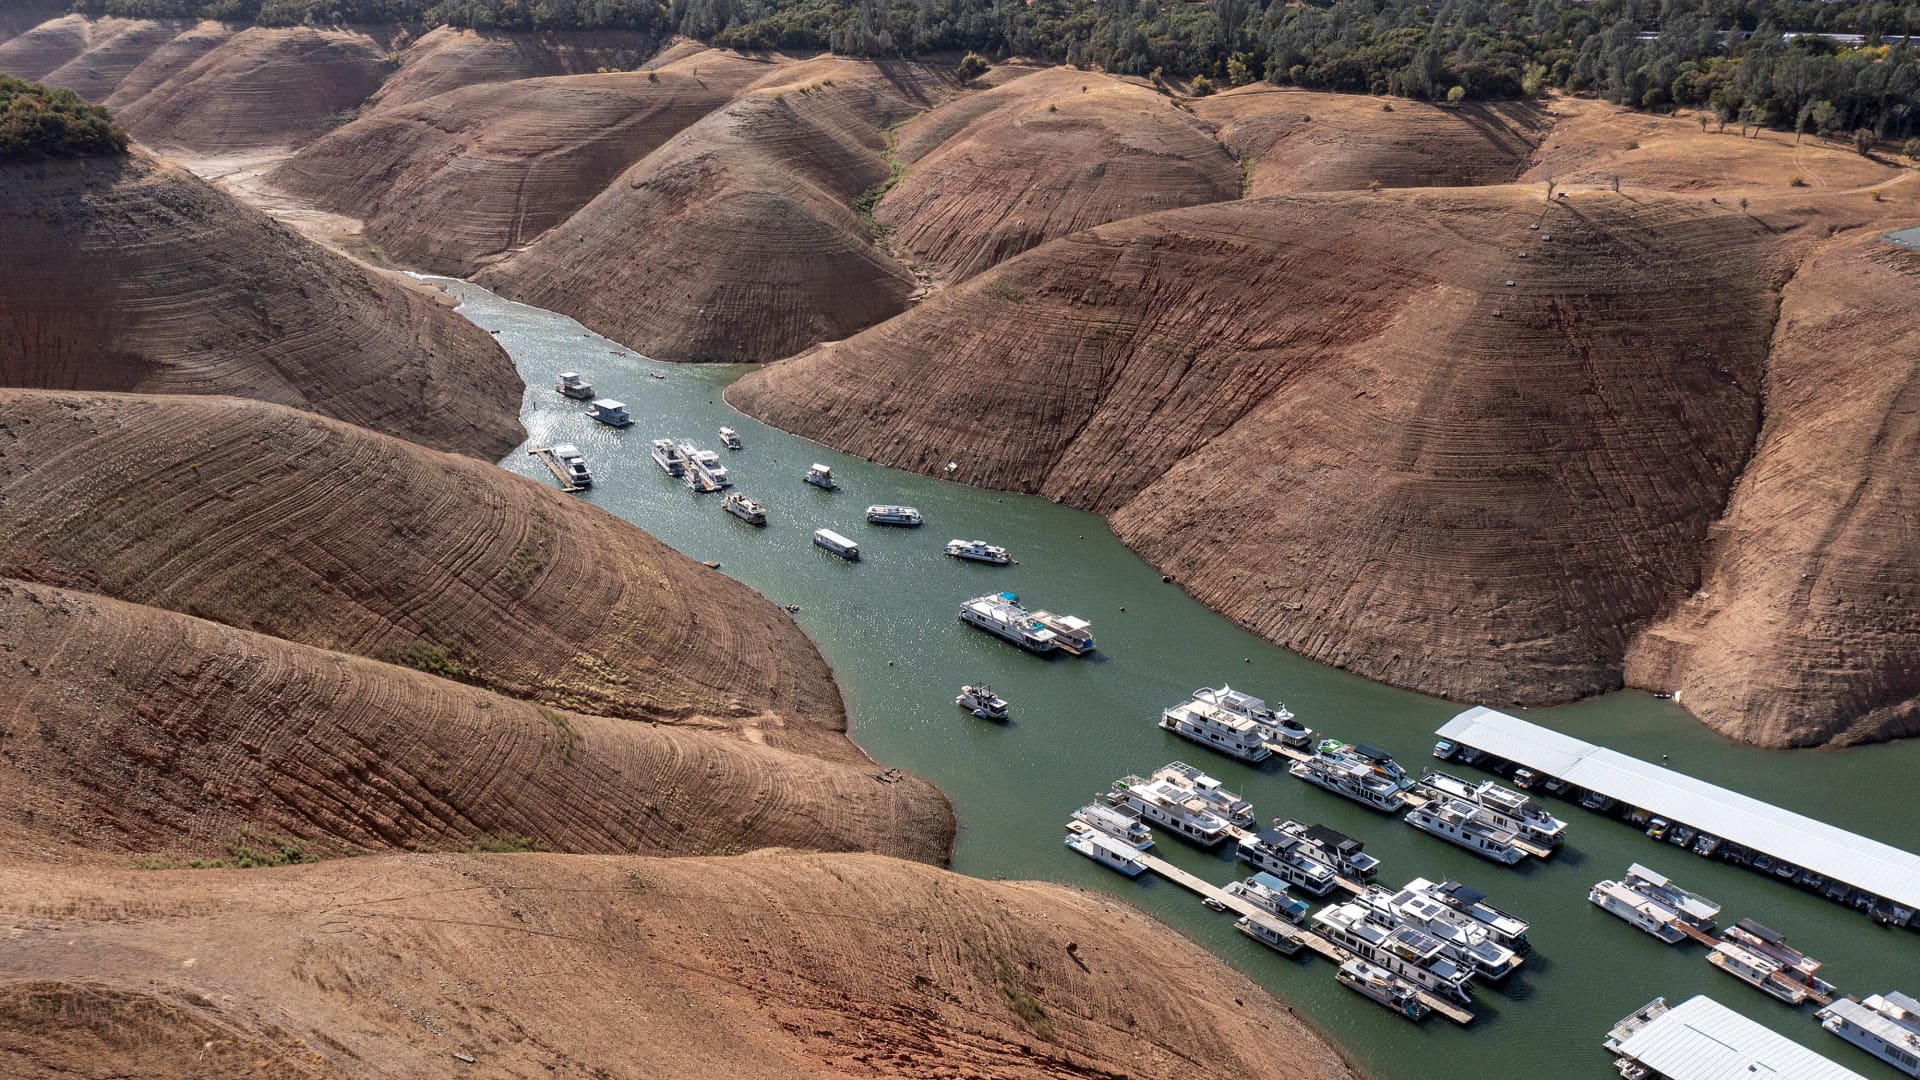 Houseboats on Lake Oroville during a drought in Oroville, California, U.S., on Monday, Oct. 11, 2021.